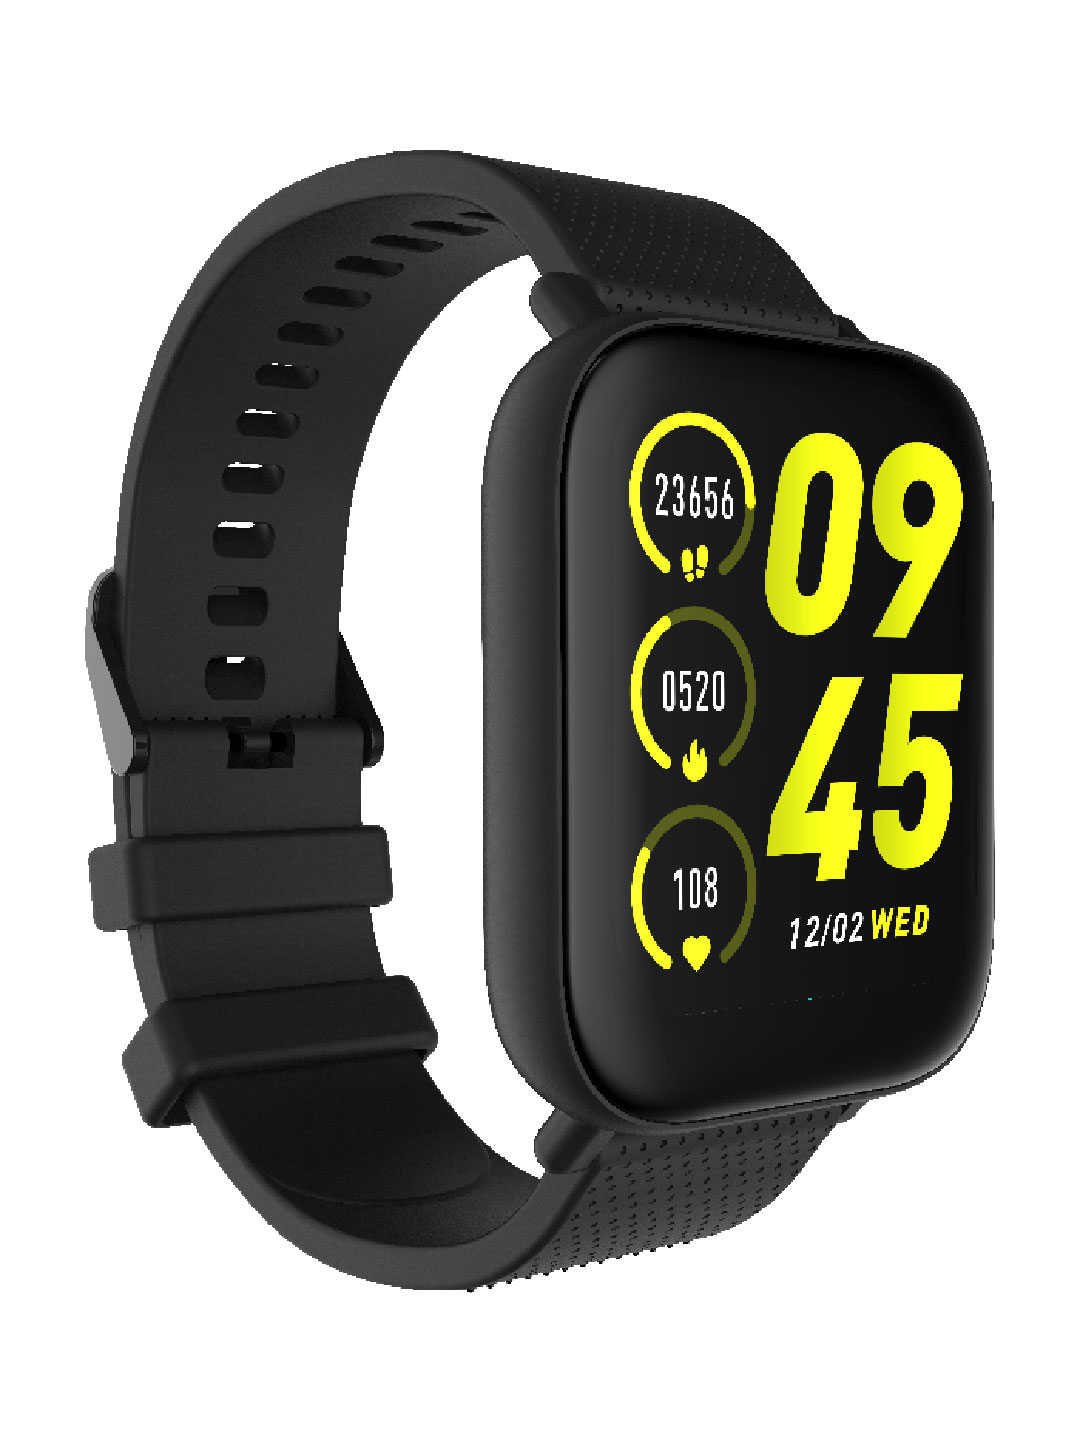 WINGS Strive 300 Smart Watch With Full Touch IPS Screen & IP68 Waterproof - Grey Price in India